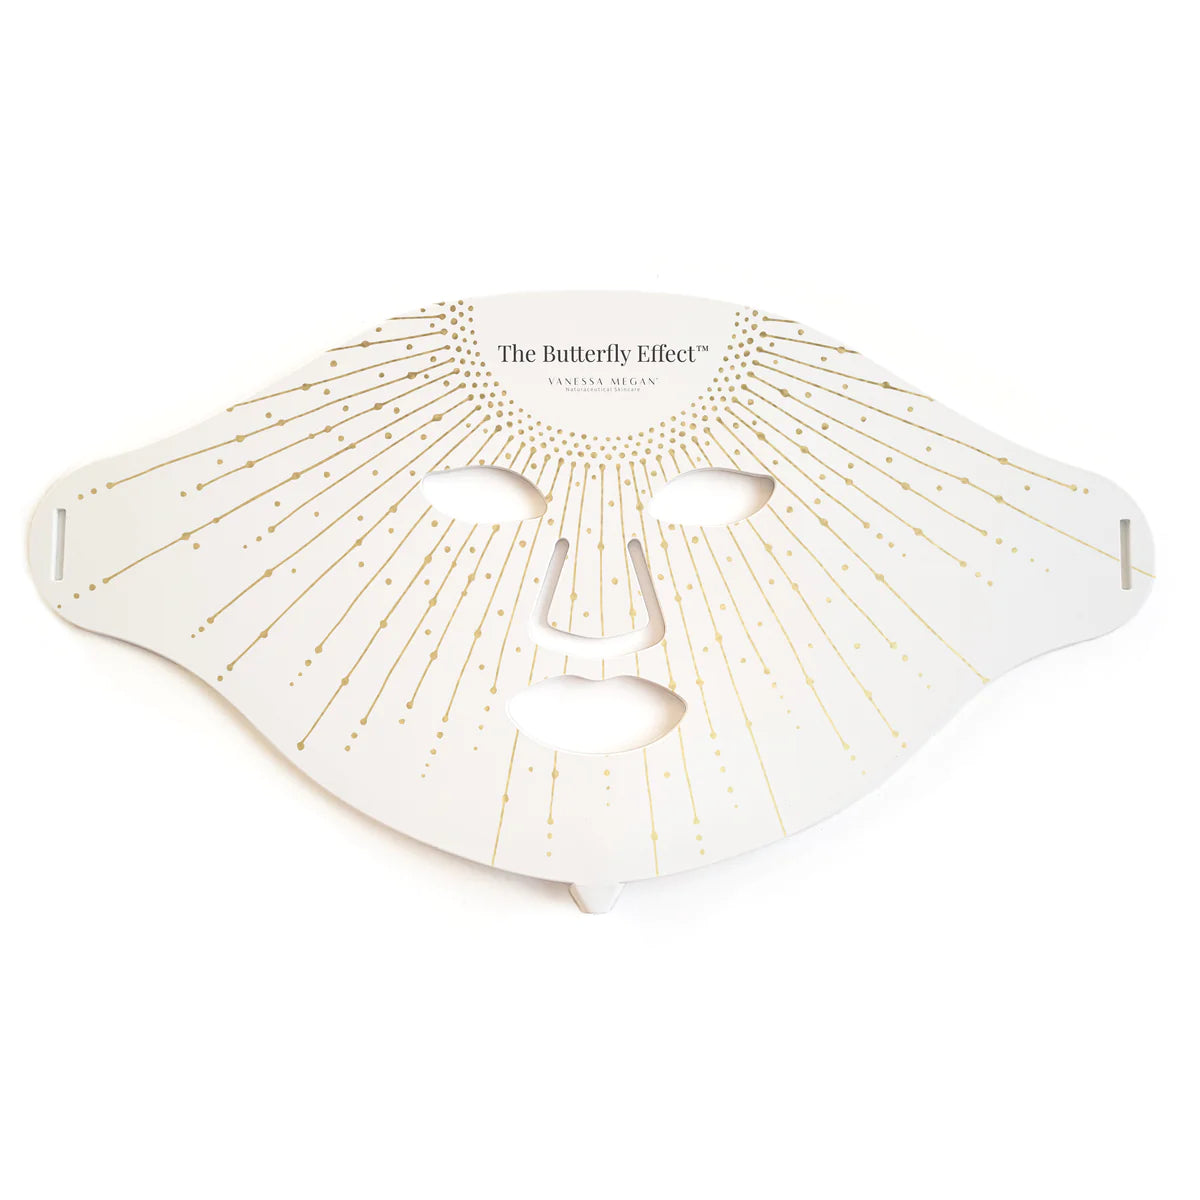 The Butterfly Effect Medical-Grade Silicone LED Mask